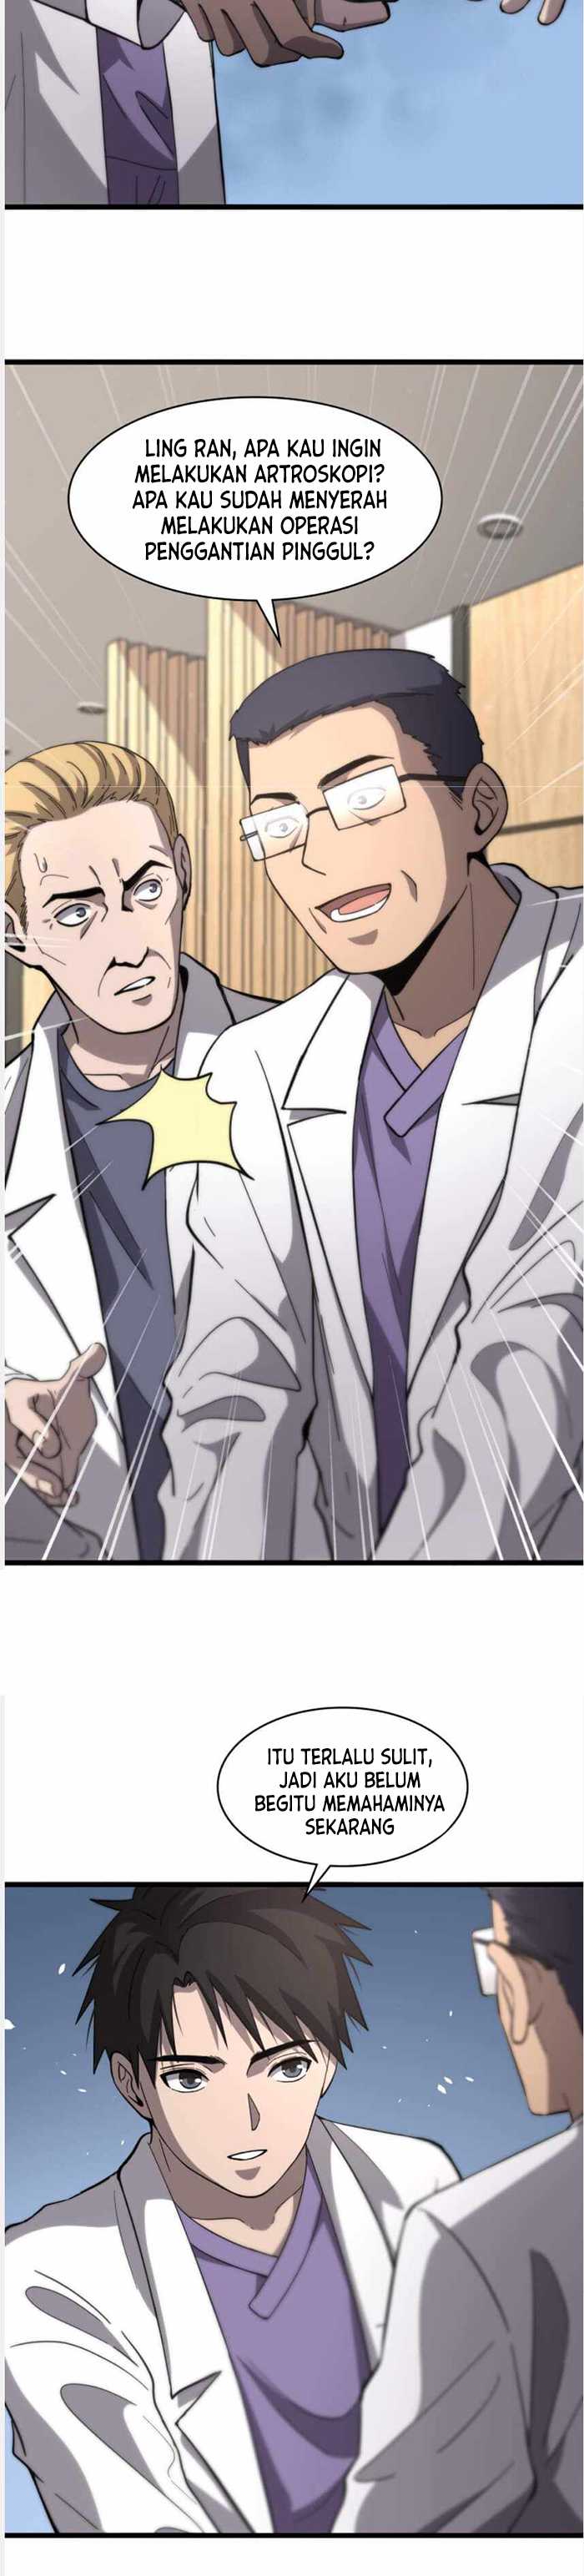 Great Doctor Ling Ran Chapter 111